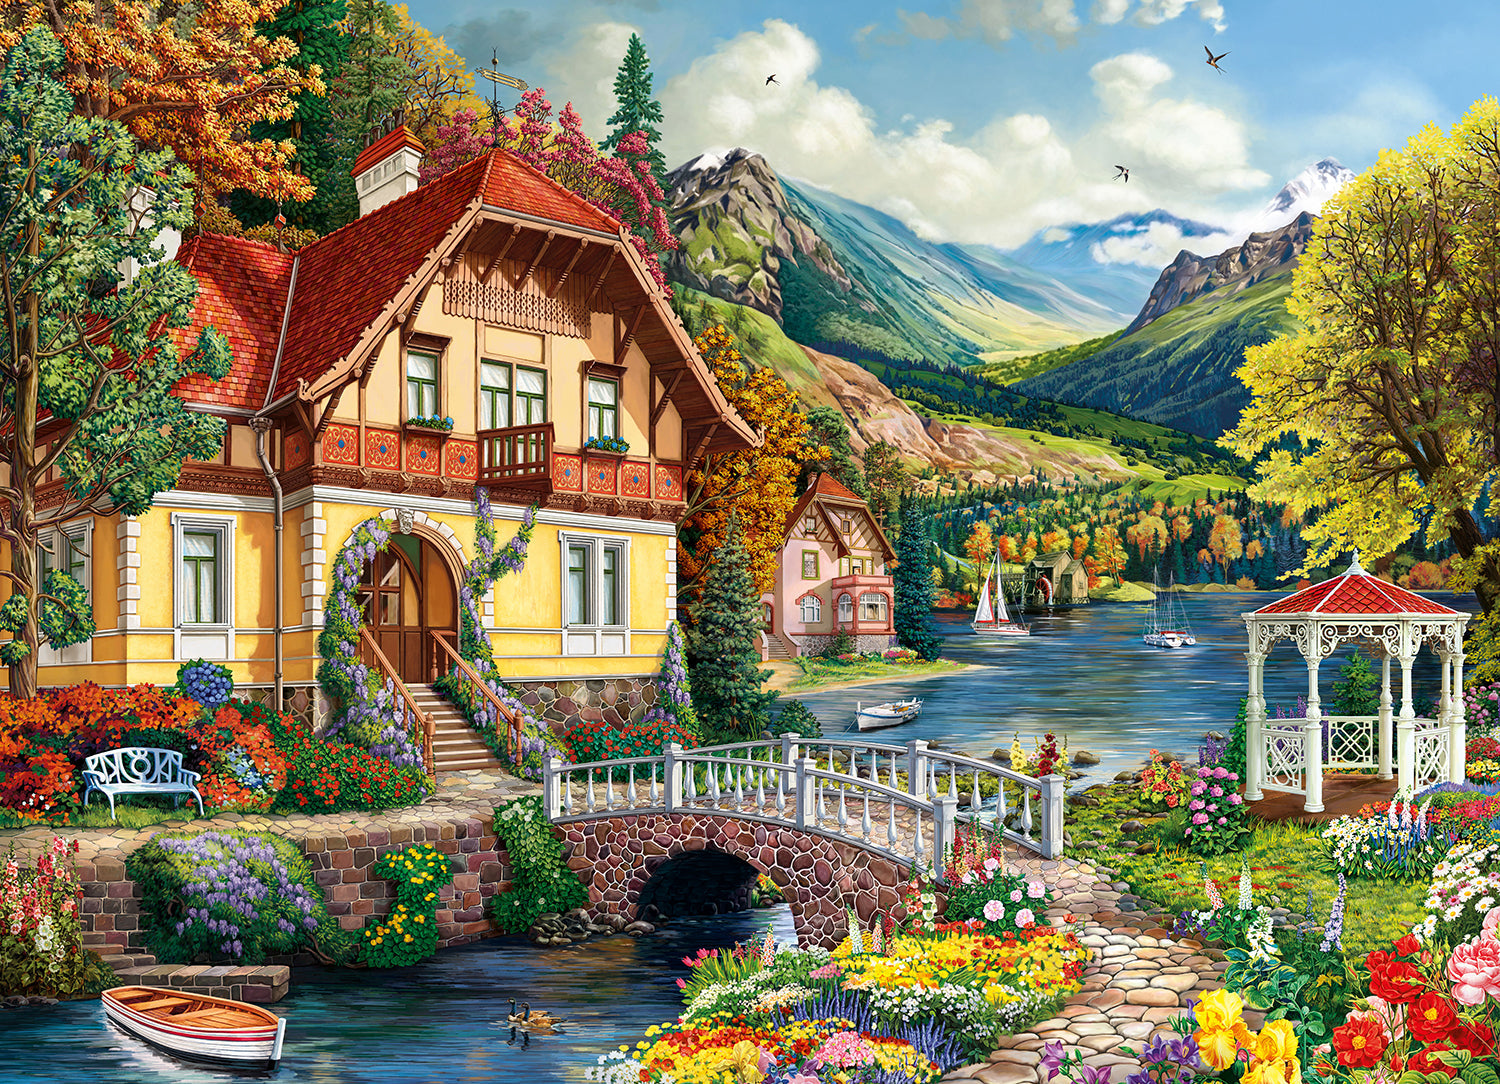 House By the Pond 1000 Piece - Jigsaw Puzzle